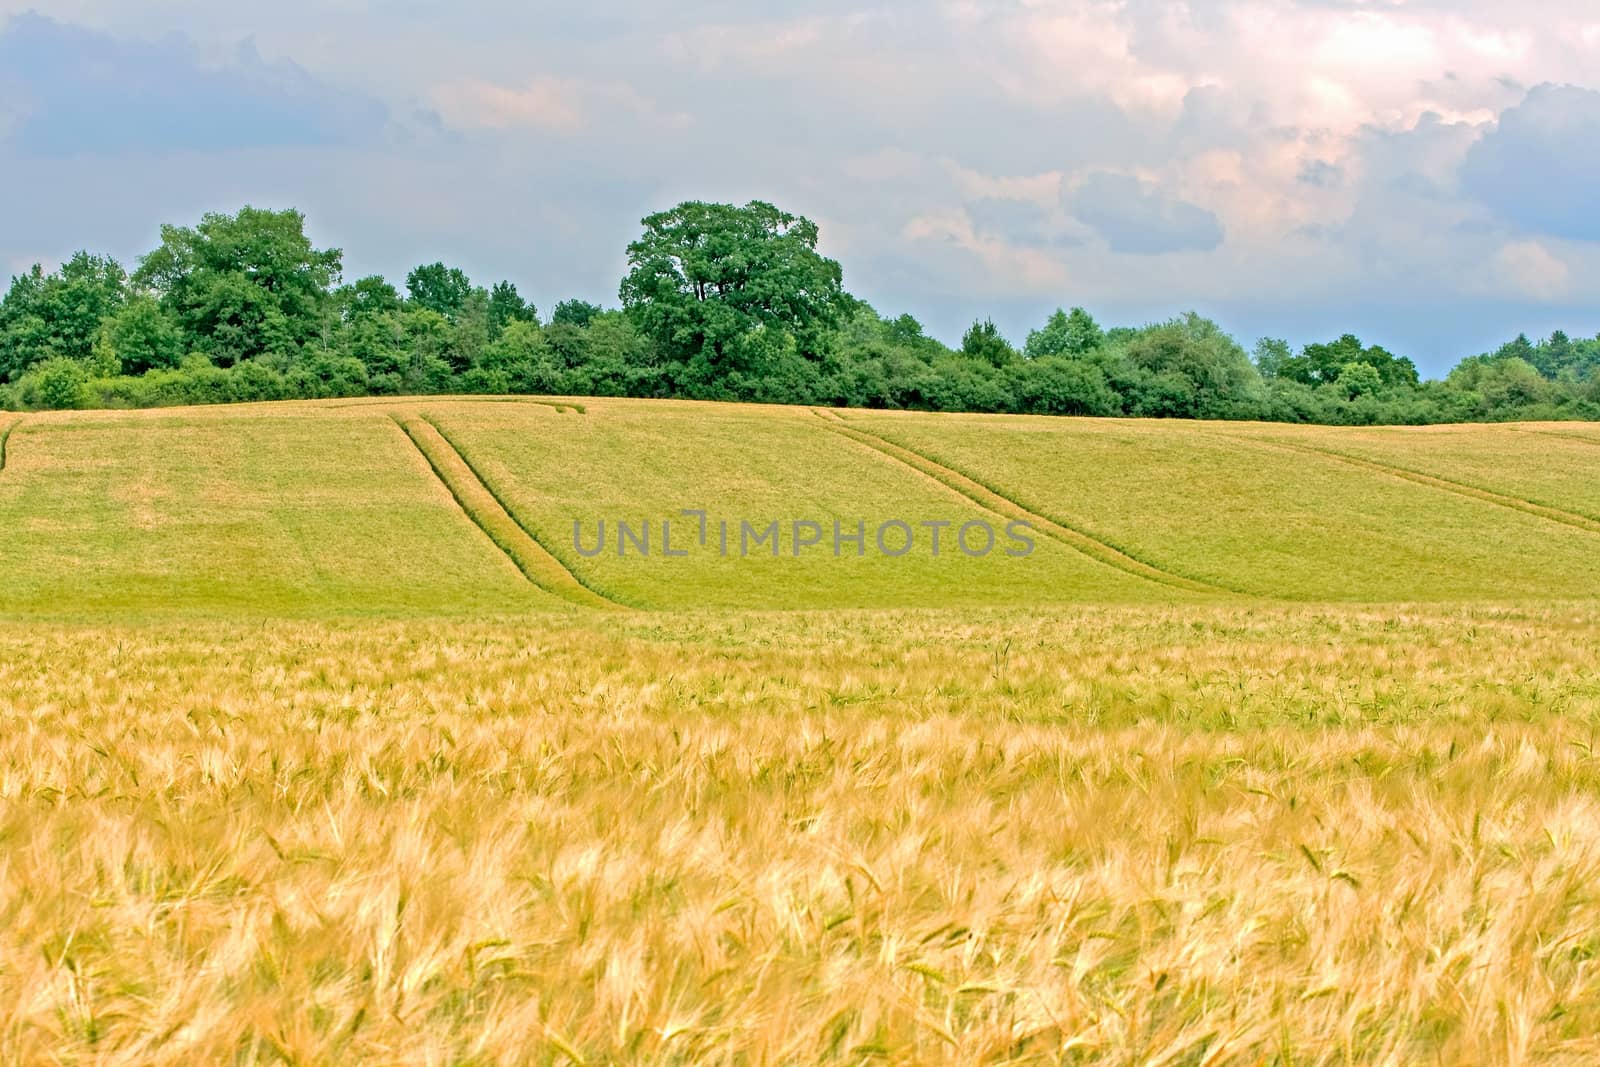 golden wheat field - rural landscape - curved hill with green trees in the background